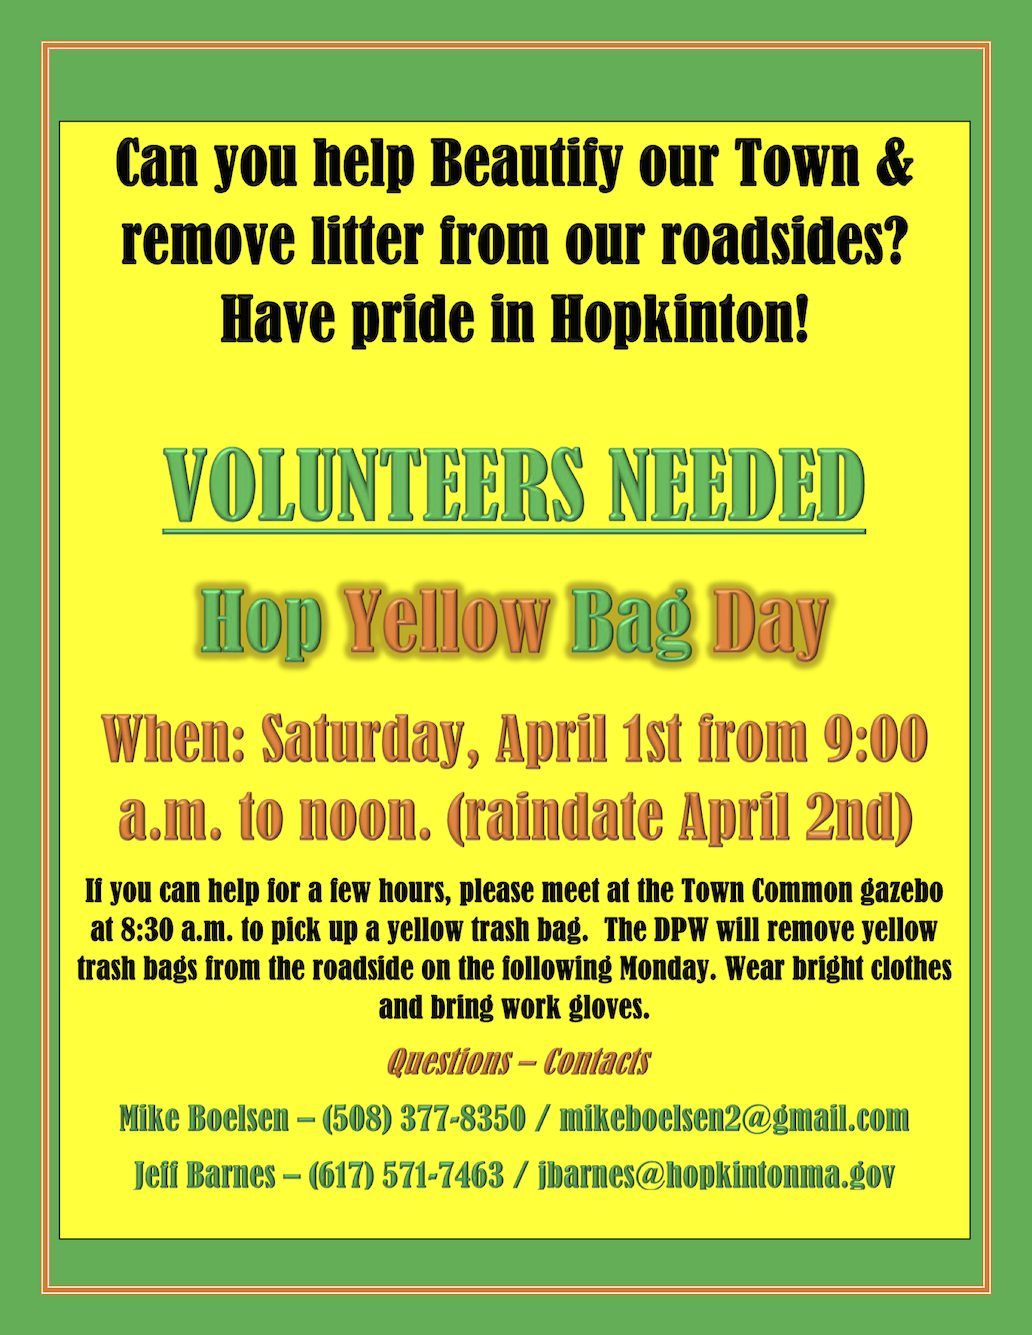 Hop Yellow Bag Day cleanup postponed to Sunday